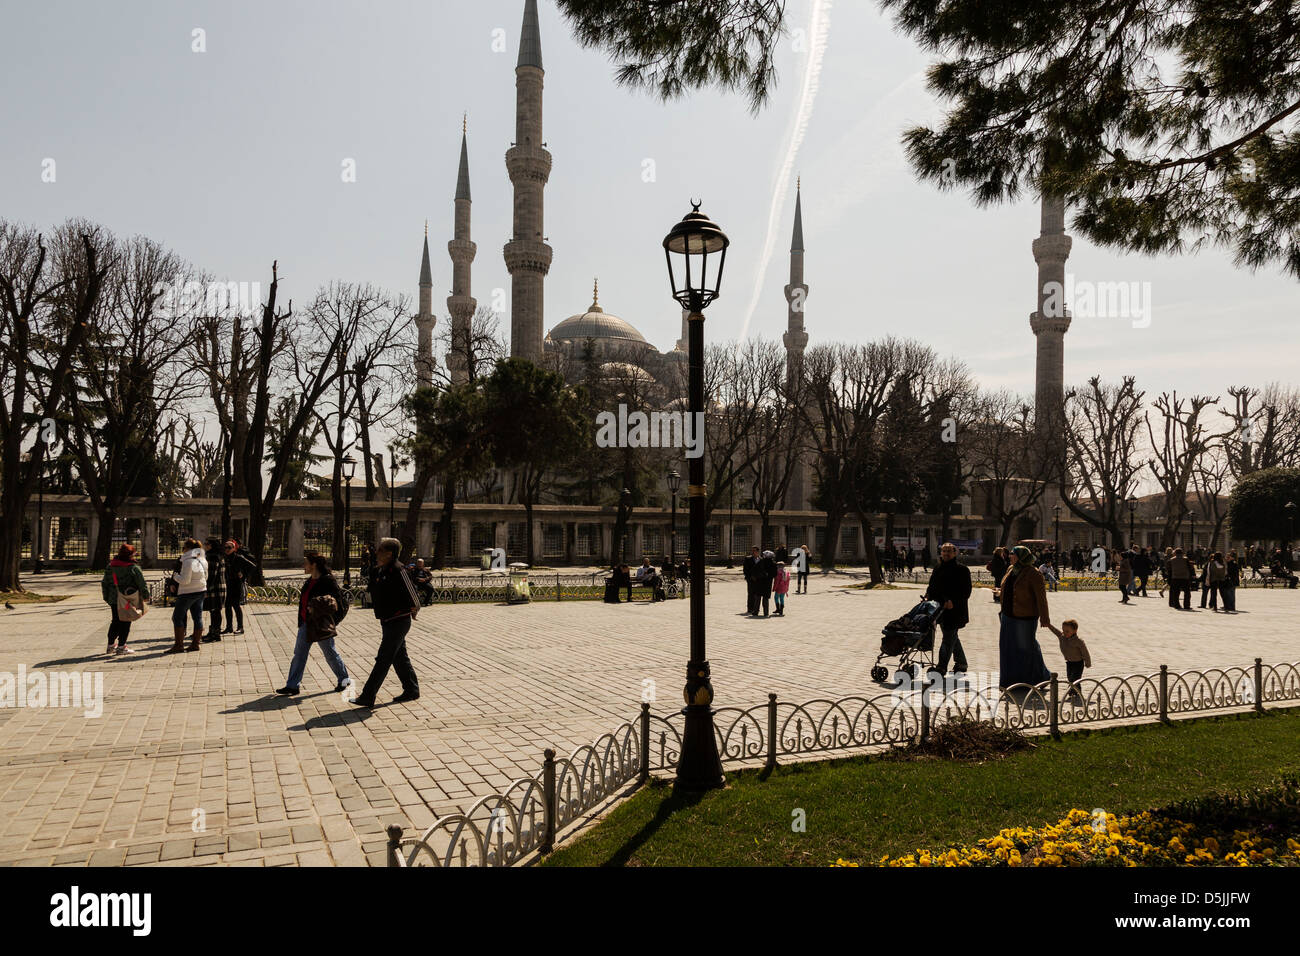 The Sultan Ahmed Mosque (Turkish: Sultanahmet Camii) is an historic mosque in Istanbul. Popularly known as the Blue Mosque. Stock Photo